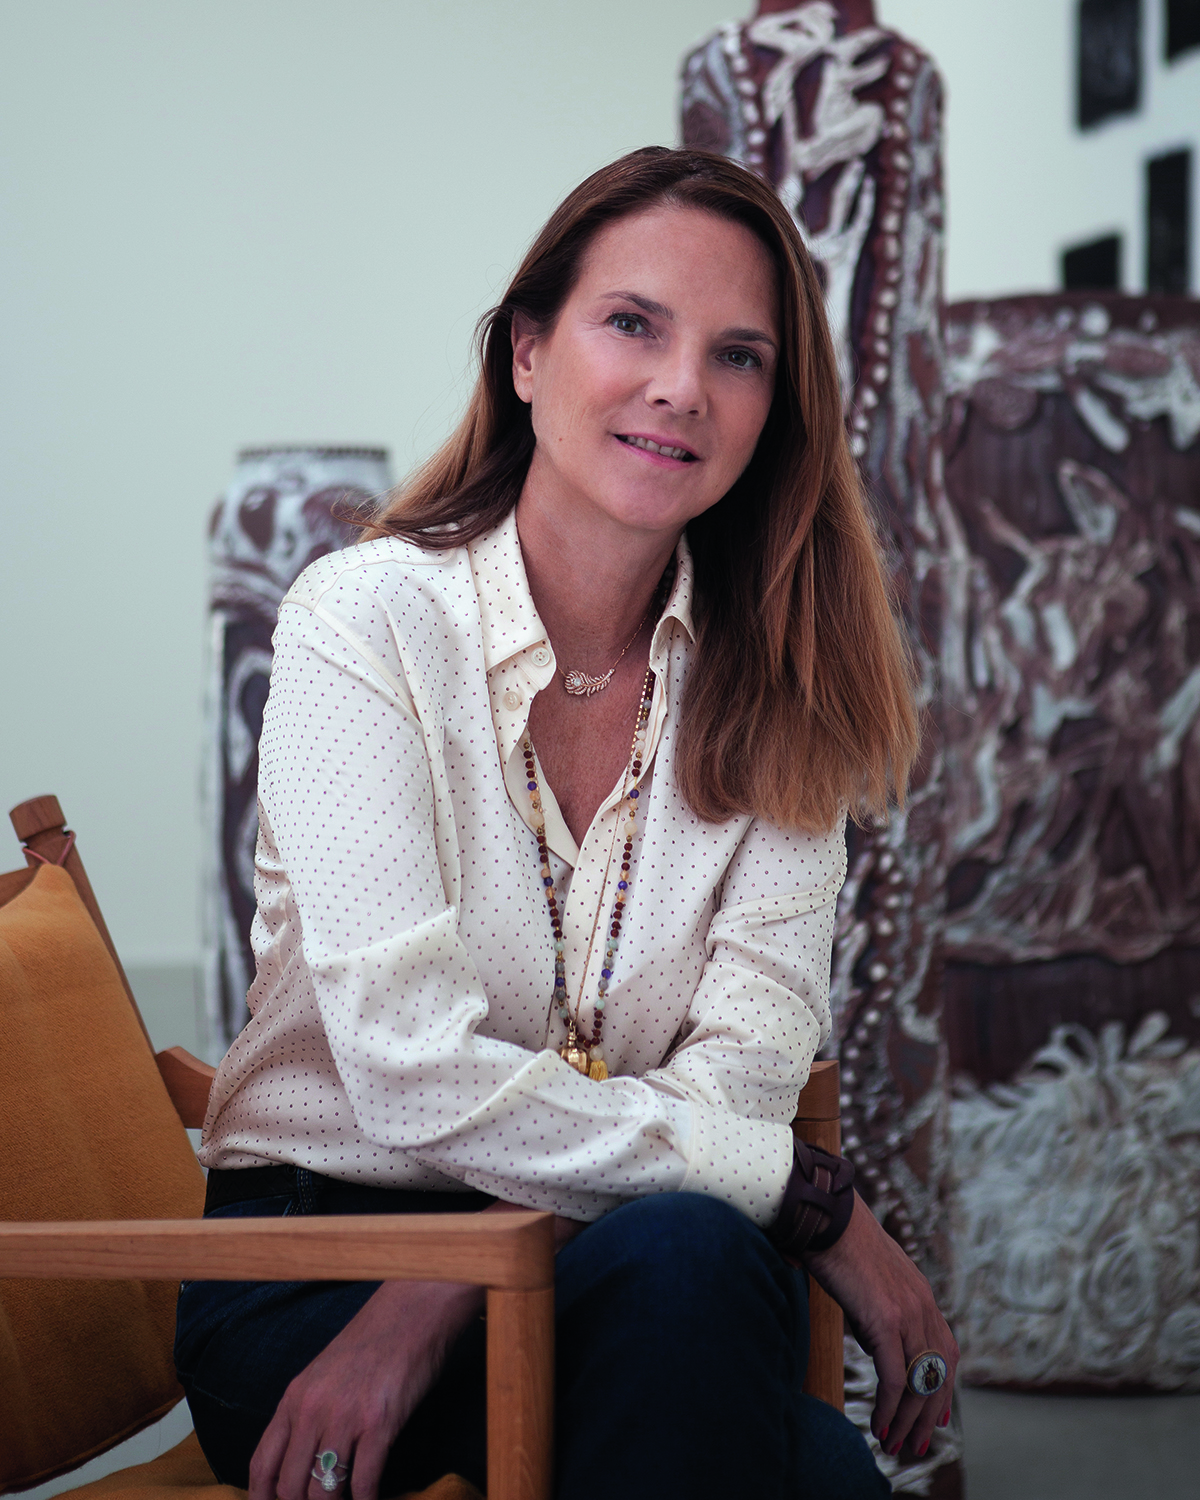 a woman wearing a white shirt sitting on a brown chair